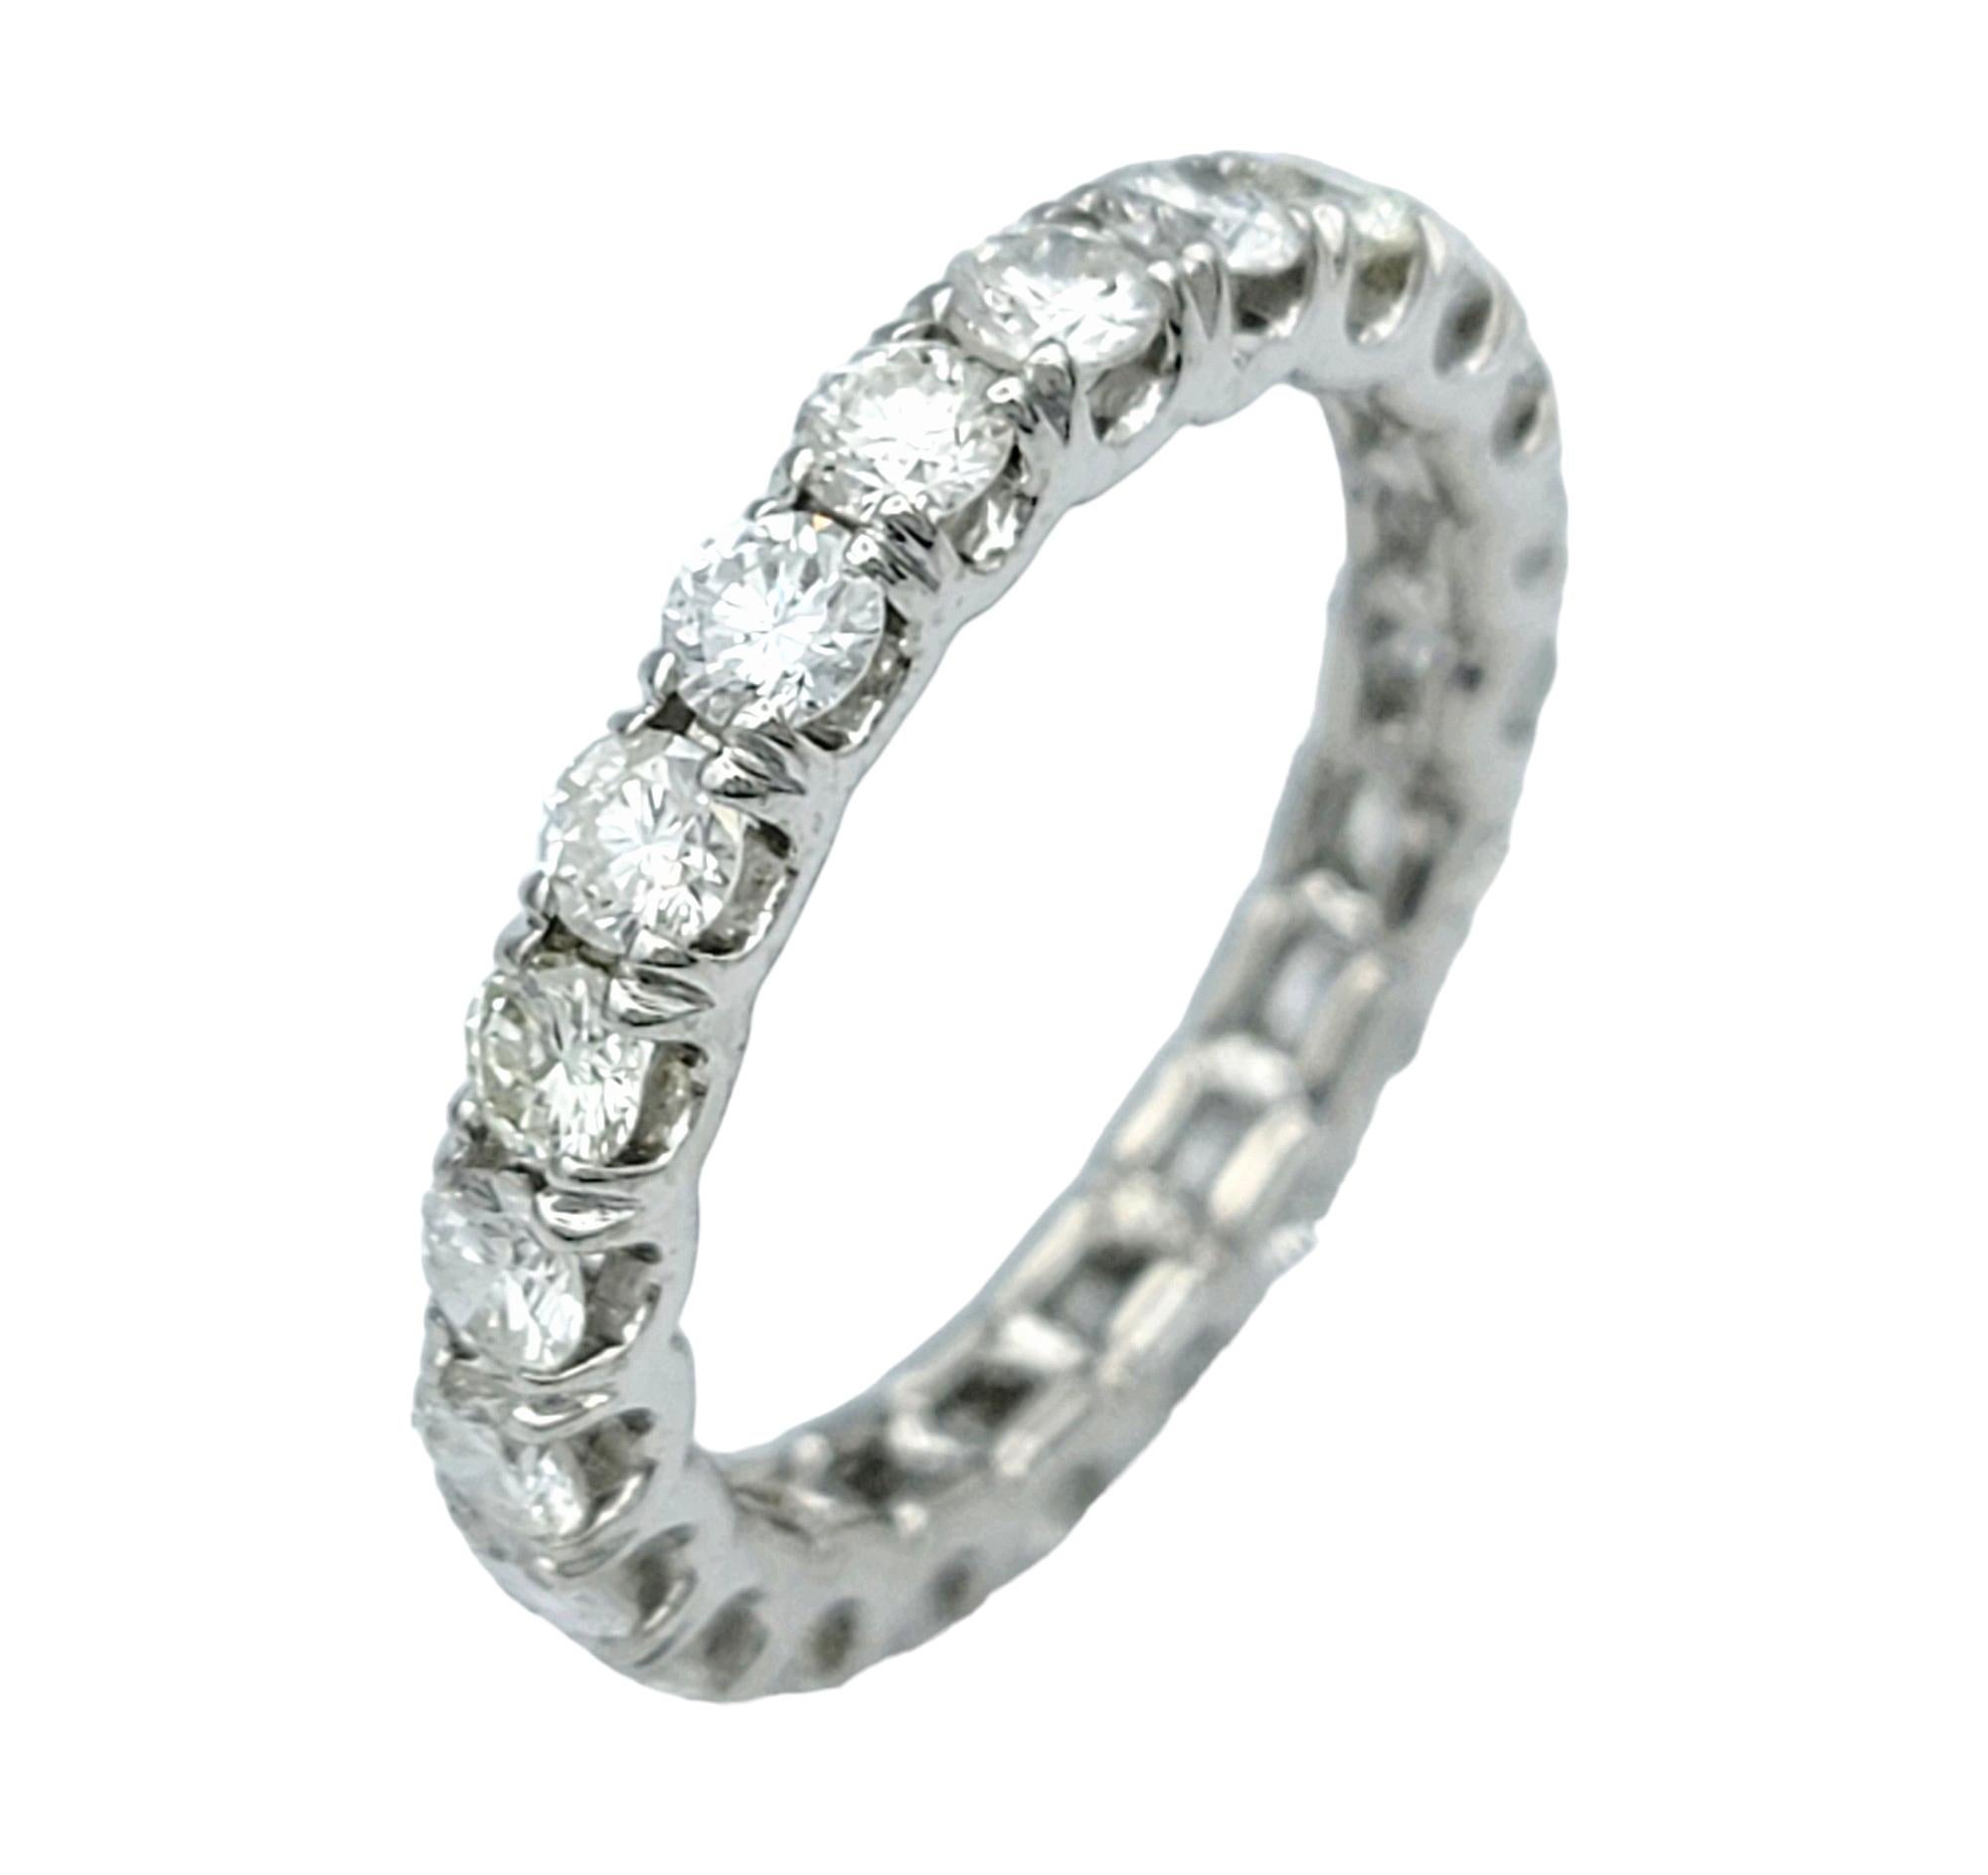 Ring Size: 6.75

This stunning diamond eternity ring, set in luxurious 18 karat white gold, is a timeless symbol of everlasting love and commitment. Encrusted with a continuous band of sparkling diamonds that encircle the entire circumference, this